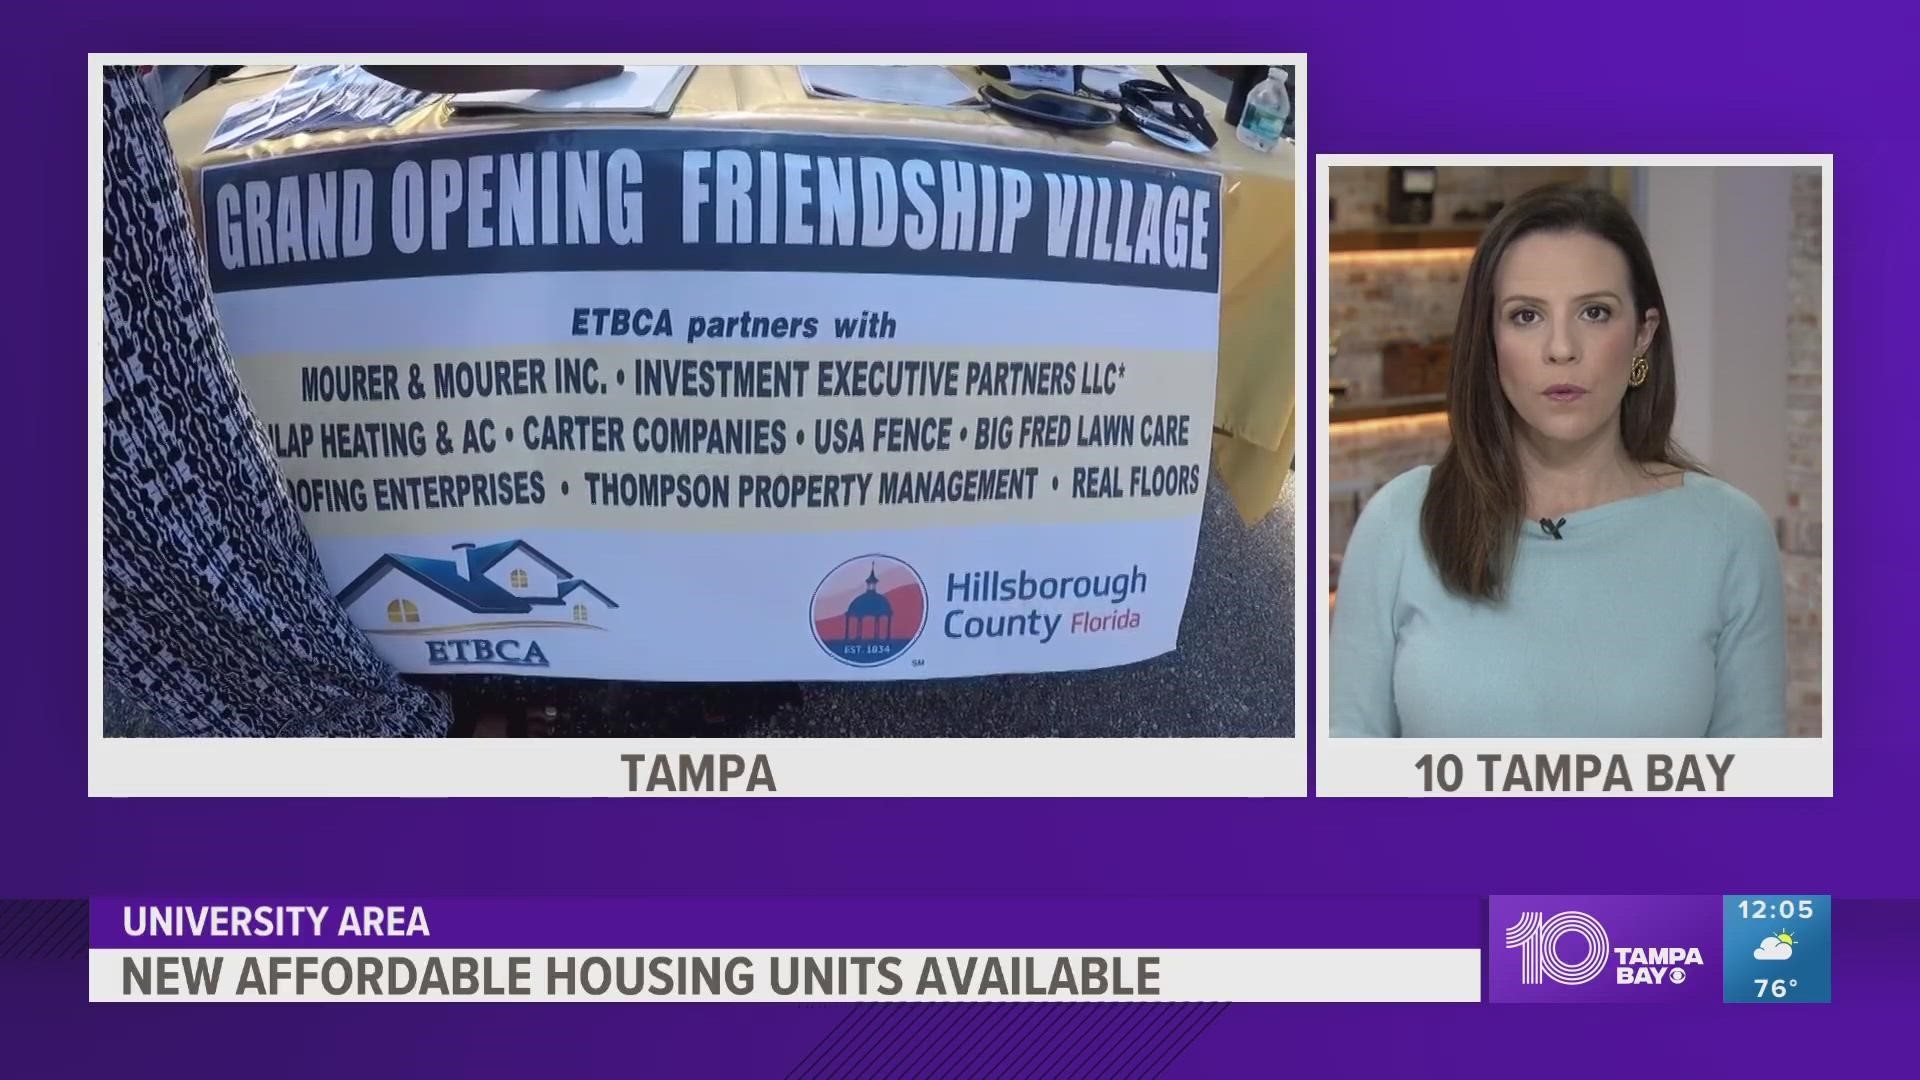 Hillsborough county leaders presented the ribbon cutting of "friendship village."